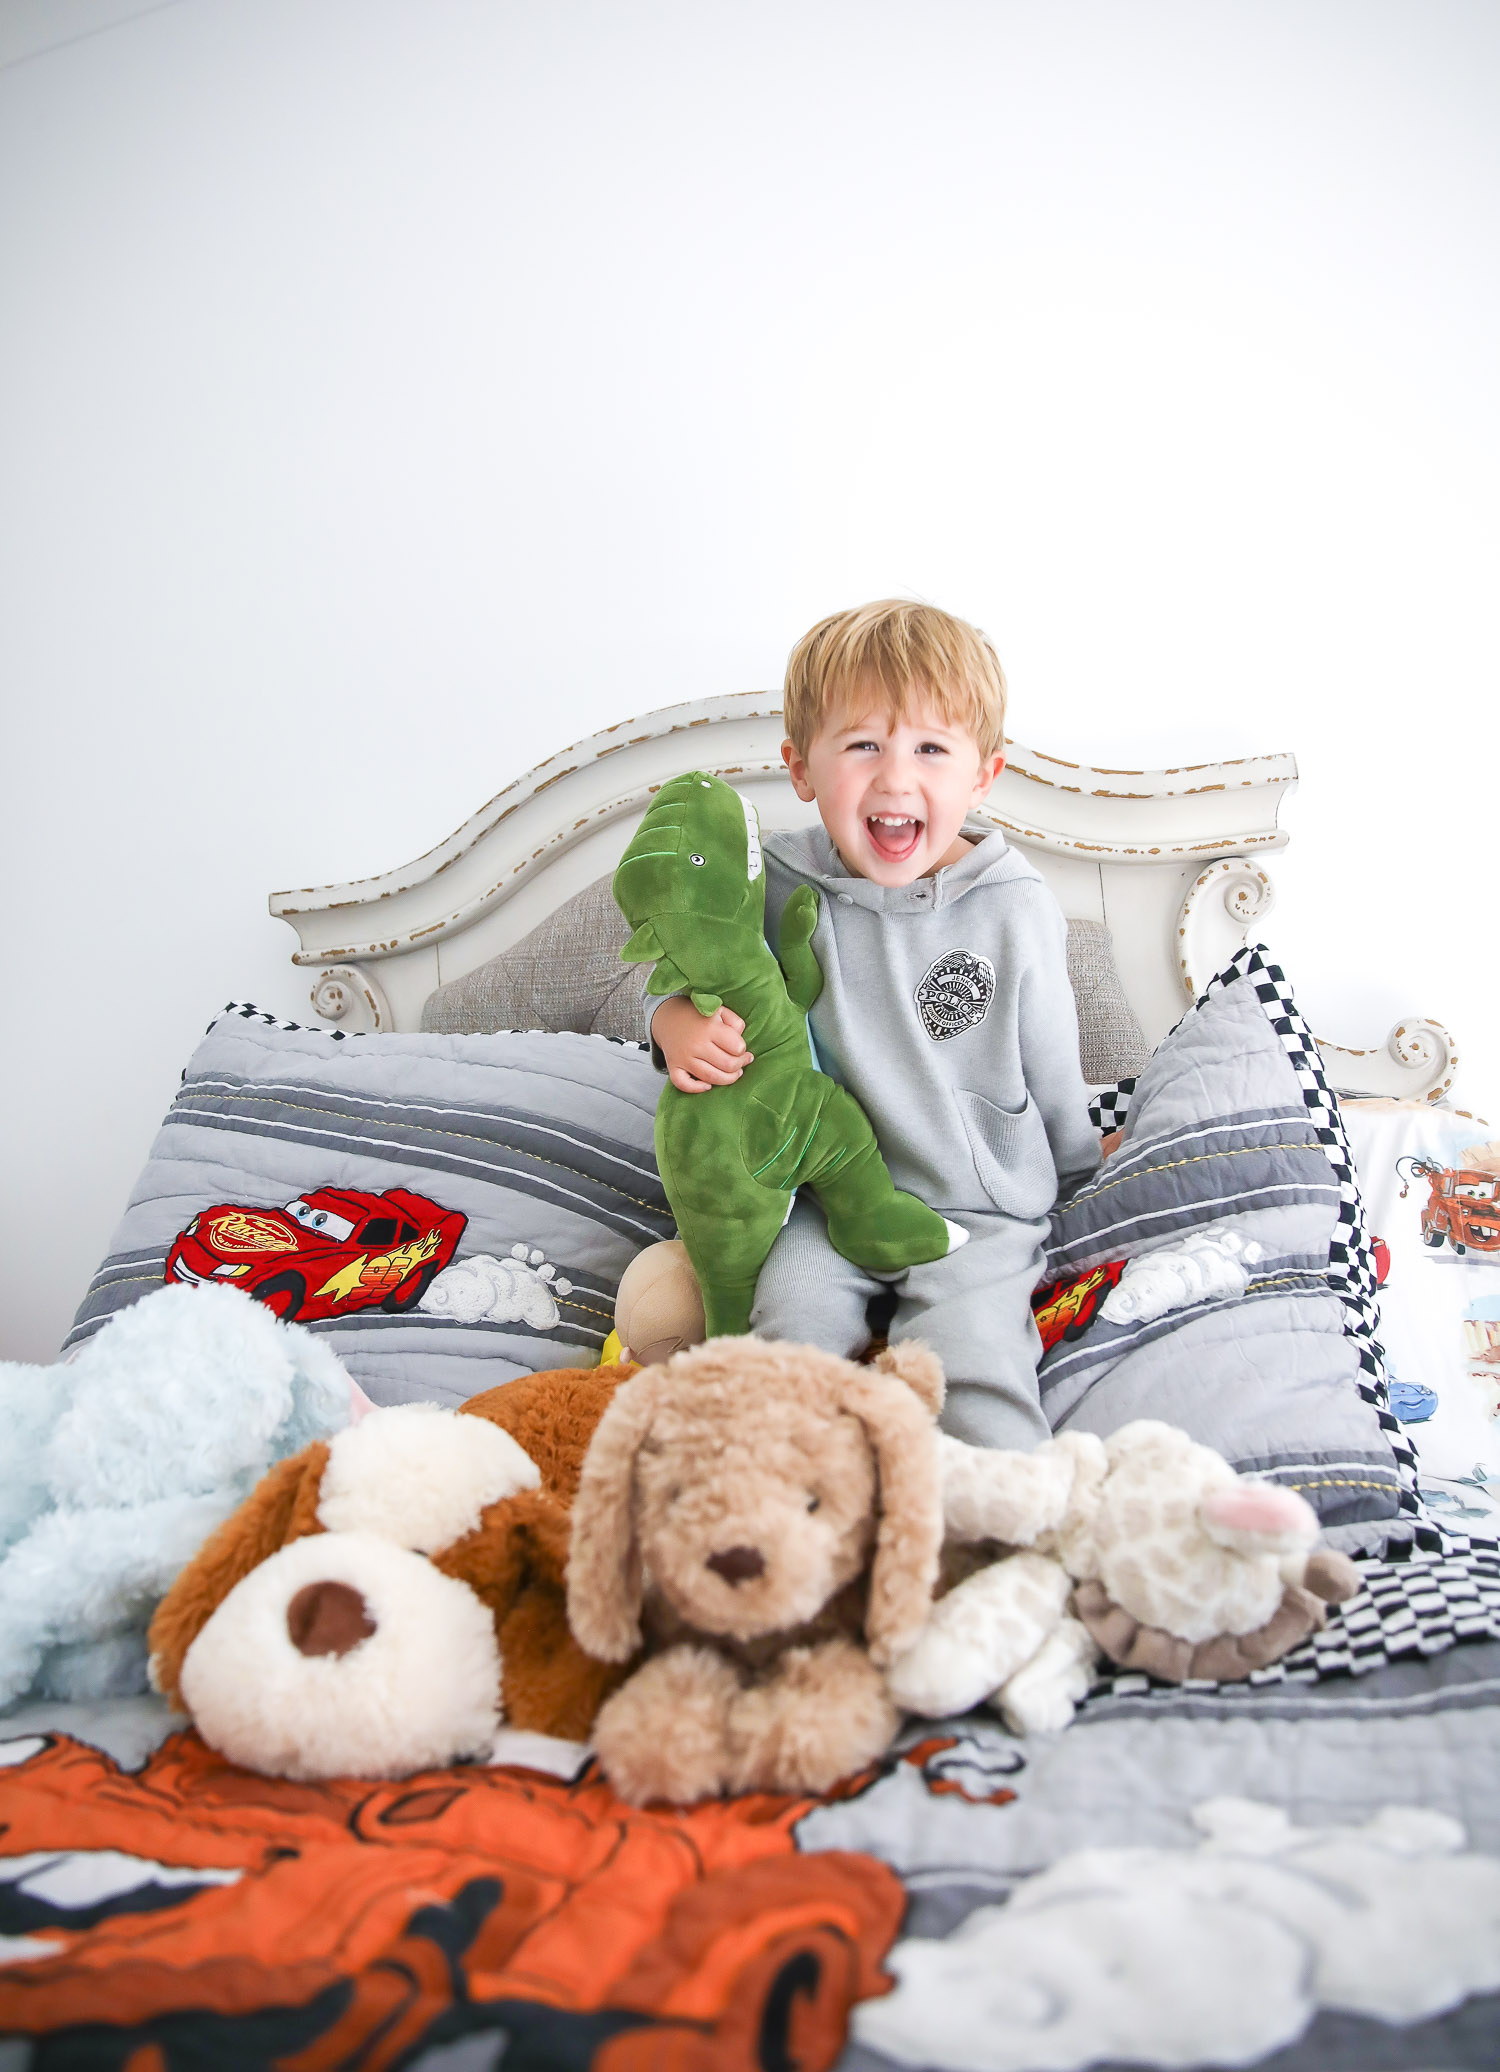 walmart kids home organization must haves, playroom organization ideas, emily gemma, the sweetest thing blog | Playroom Organization by popular US life and style blog, The Sweetest Thing: image of a little boy sitting on his bed with some stuffed animals. 